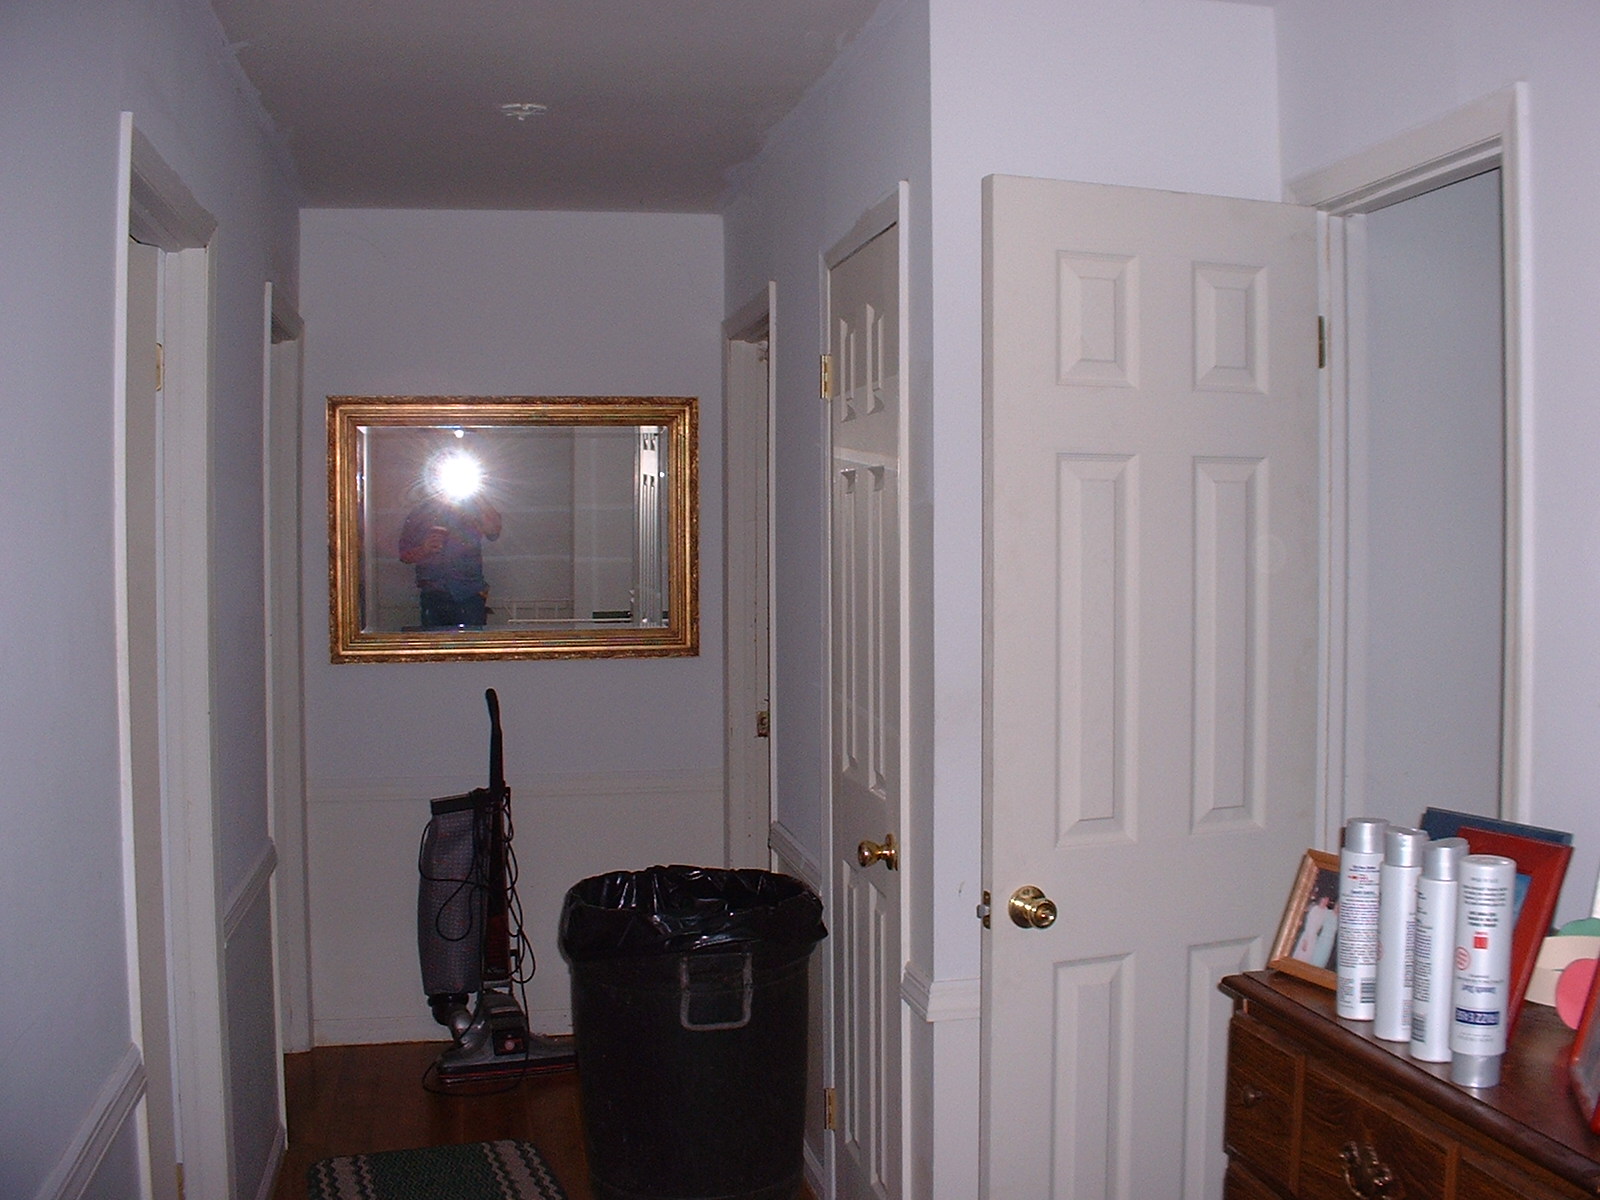 We replaced all the interior doors, hardware, and trim.